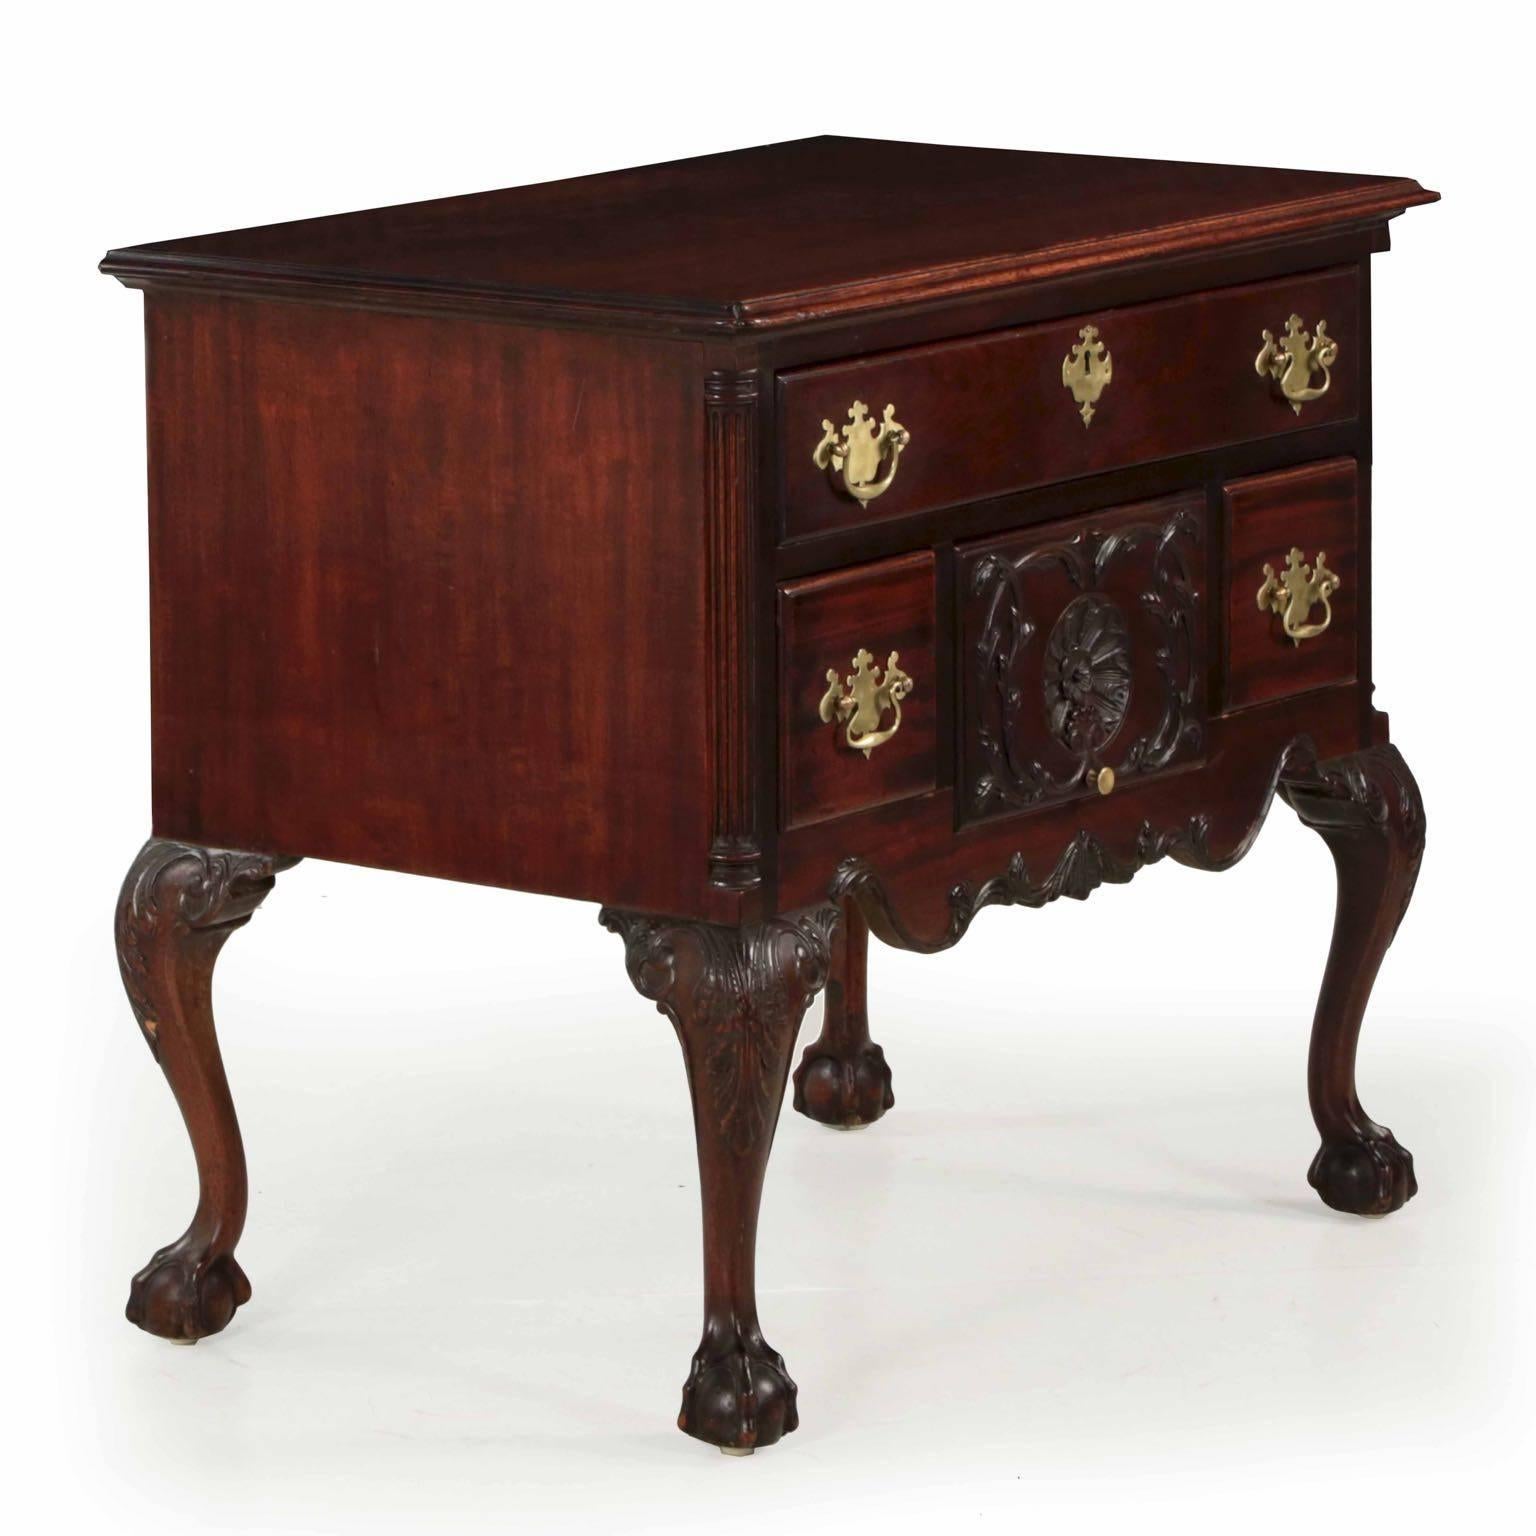 American Chippendale style carved mahogany lowboy
In the Philadelphia taste, late 19th century
Item # 706DOV24I 

A bold and striking work from the last quarter of the 19th century, this carefully benchmade lowboy is modeled after the works of